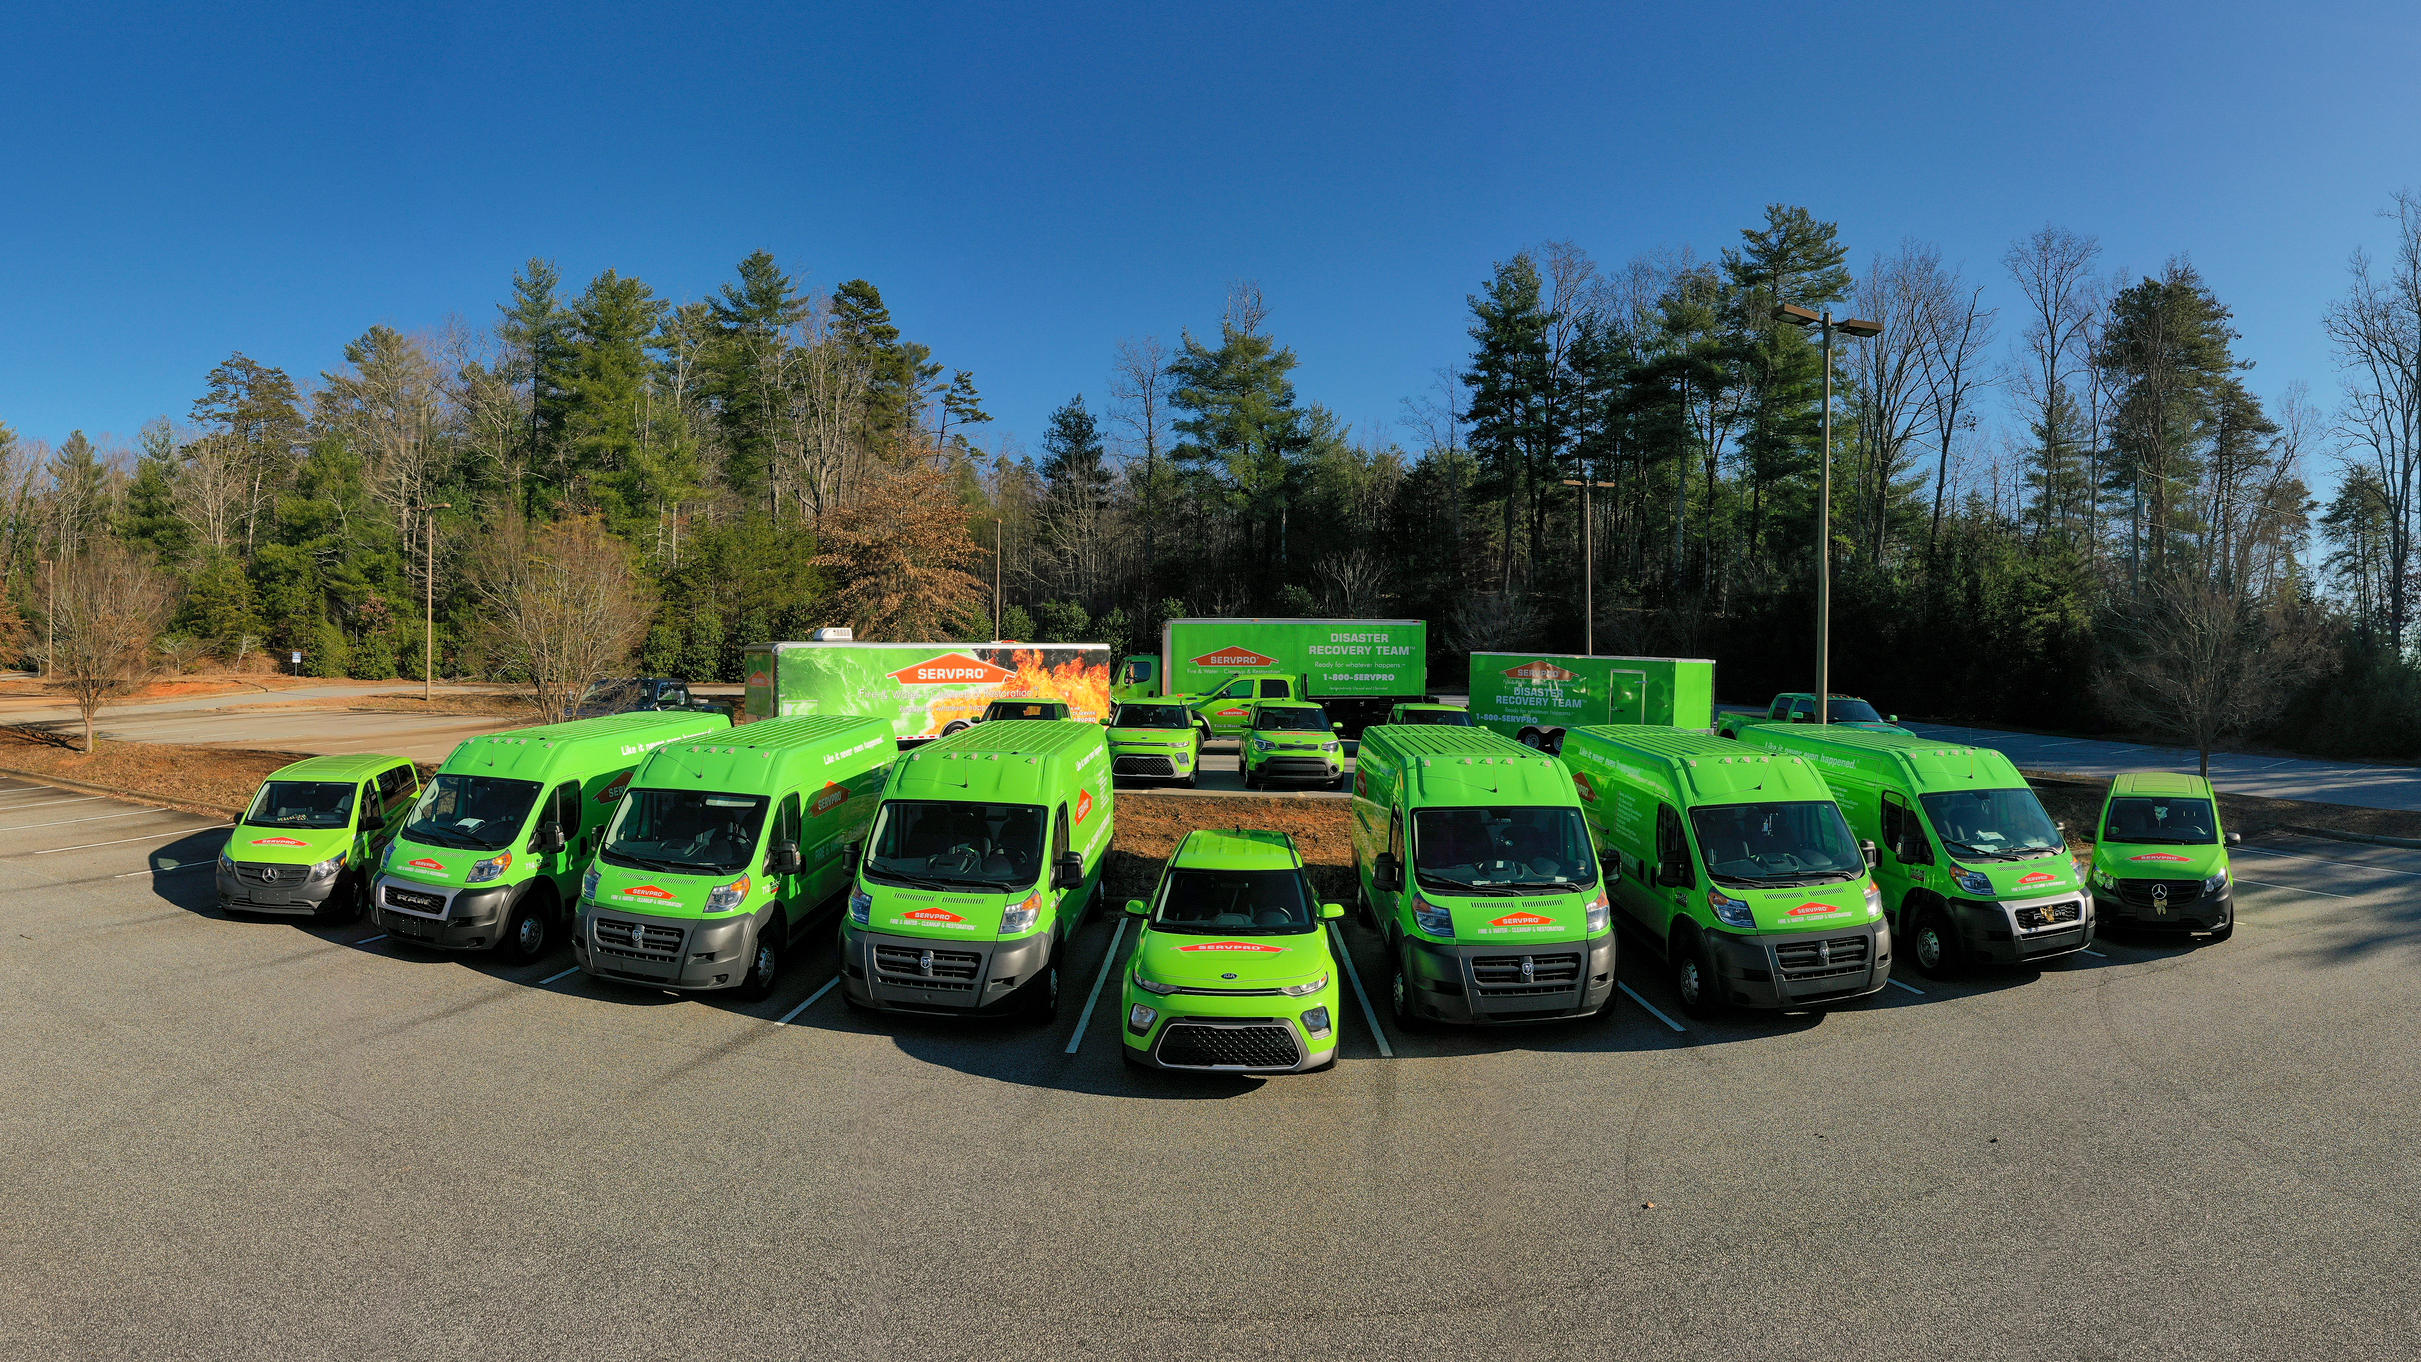 We have dozens of vehicles and employees, so we can help with any size disaster!